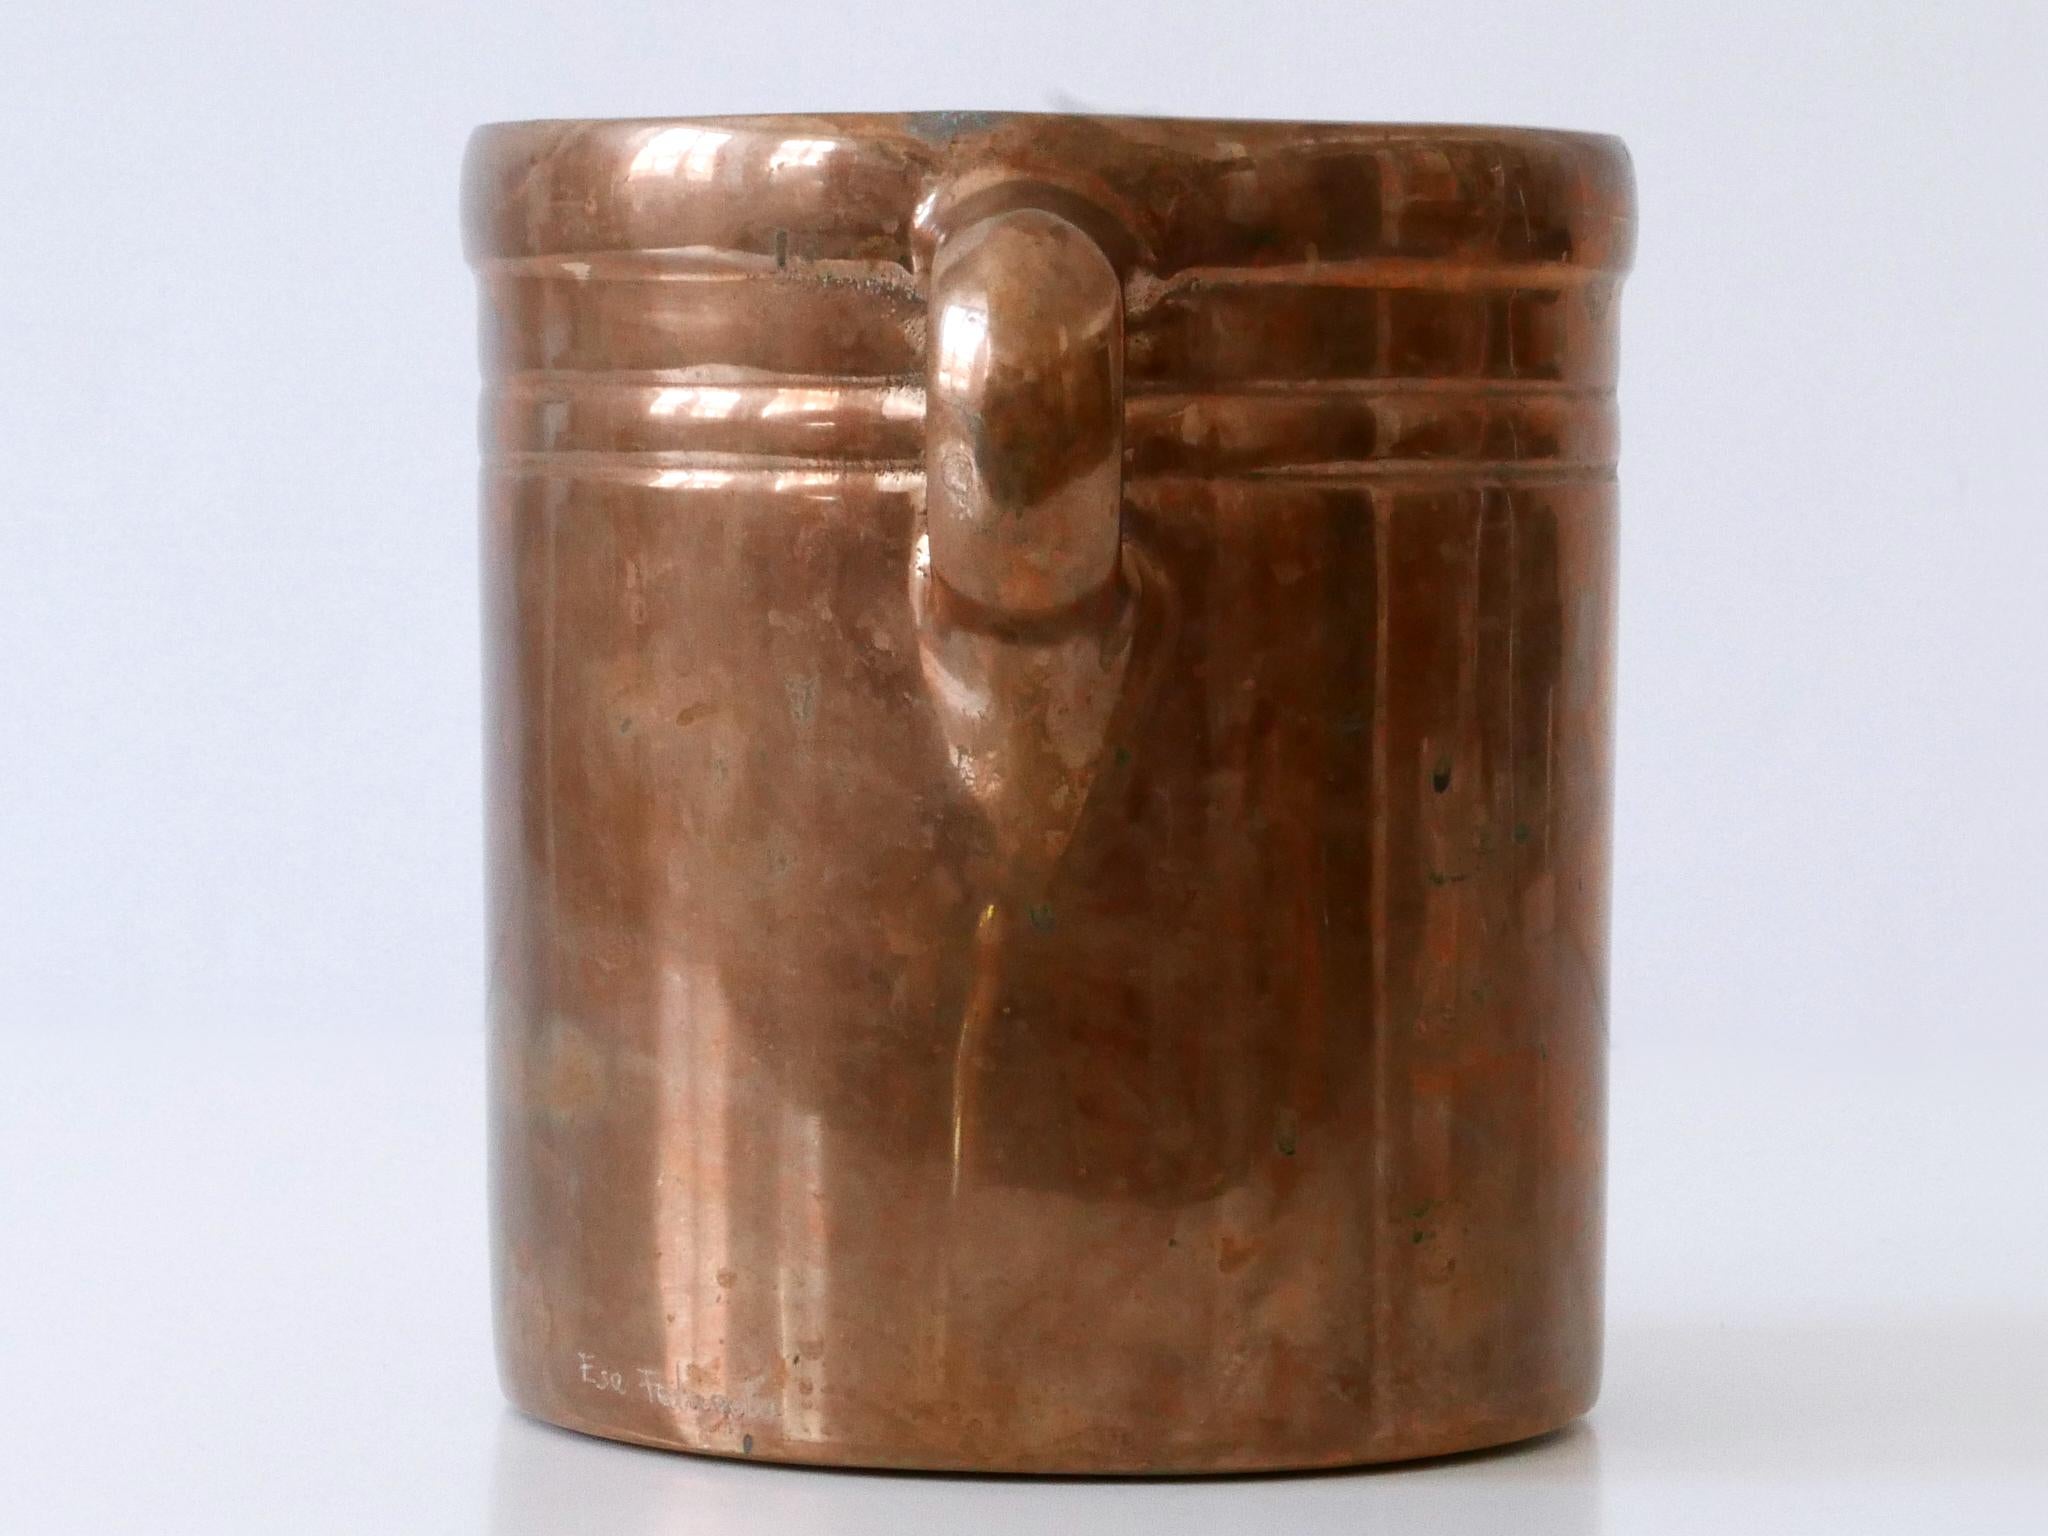 Exceptional Bronze Champagne Cooler or Ice Bucket by Esa Fedrigolli for Esart In Good Condition For Sale In Munich, DE